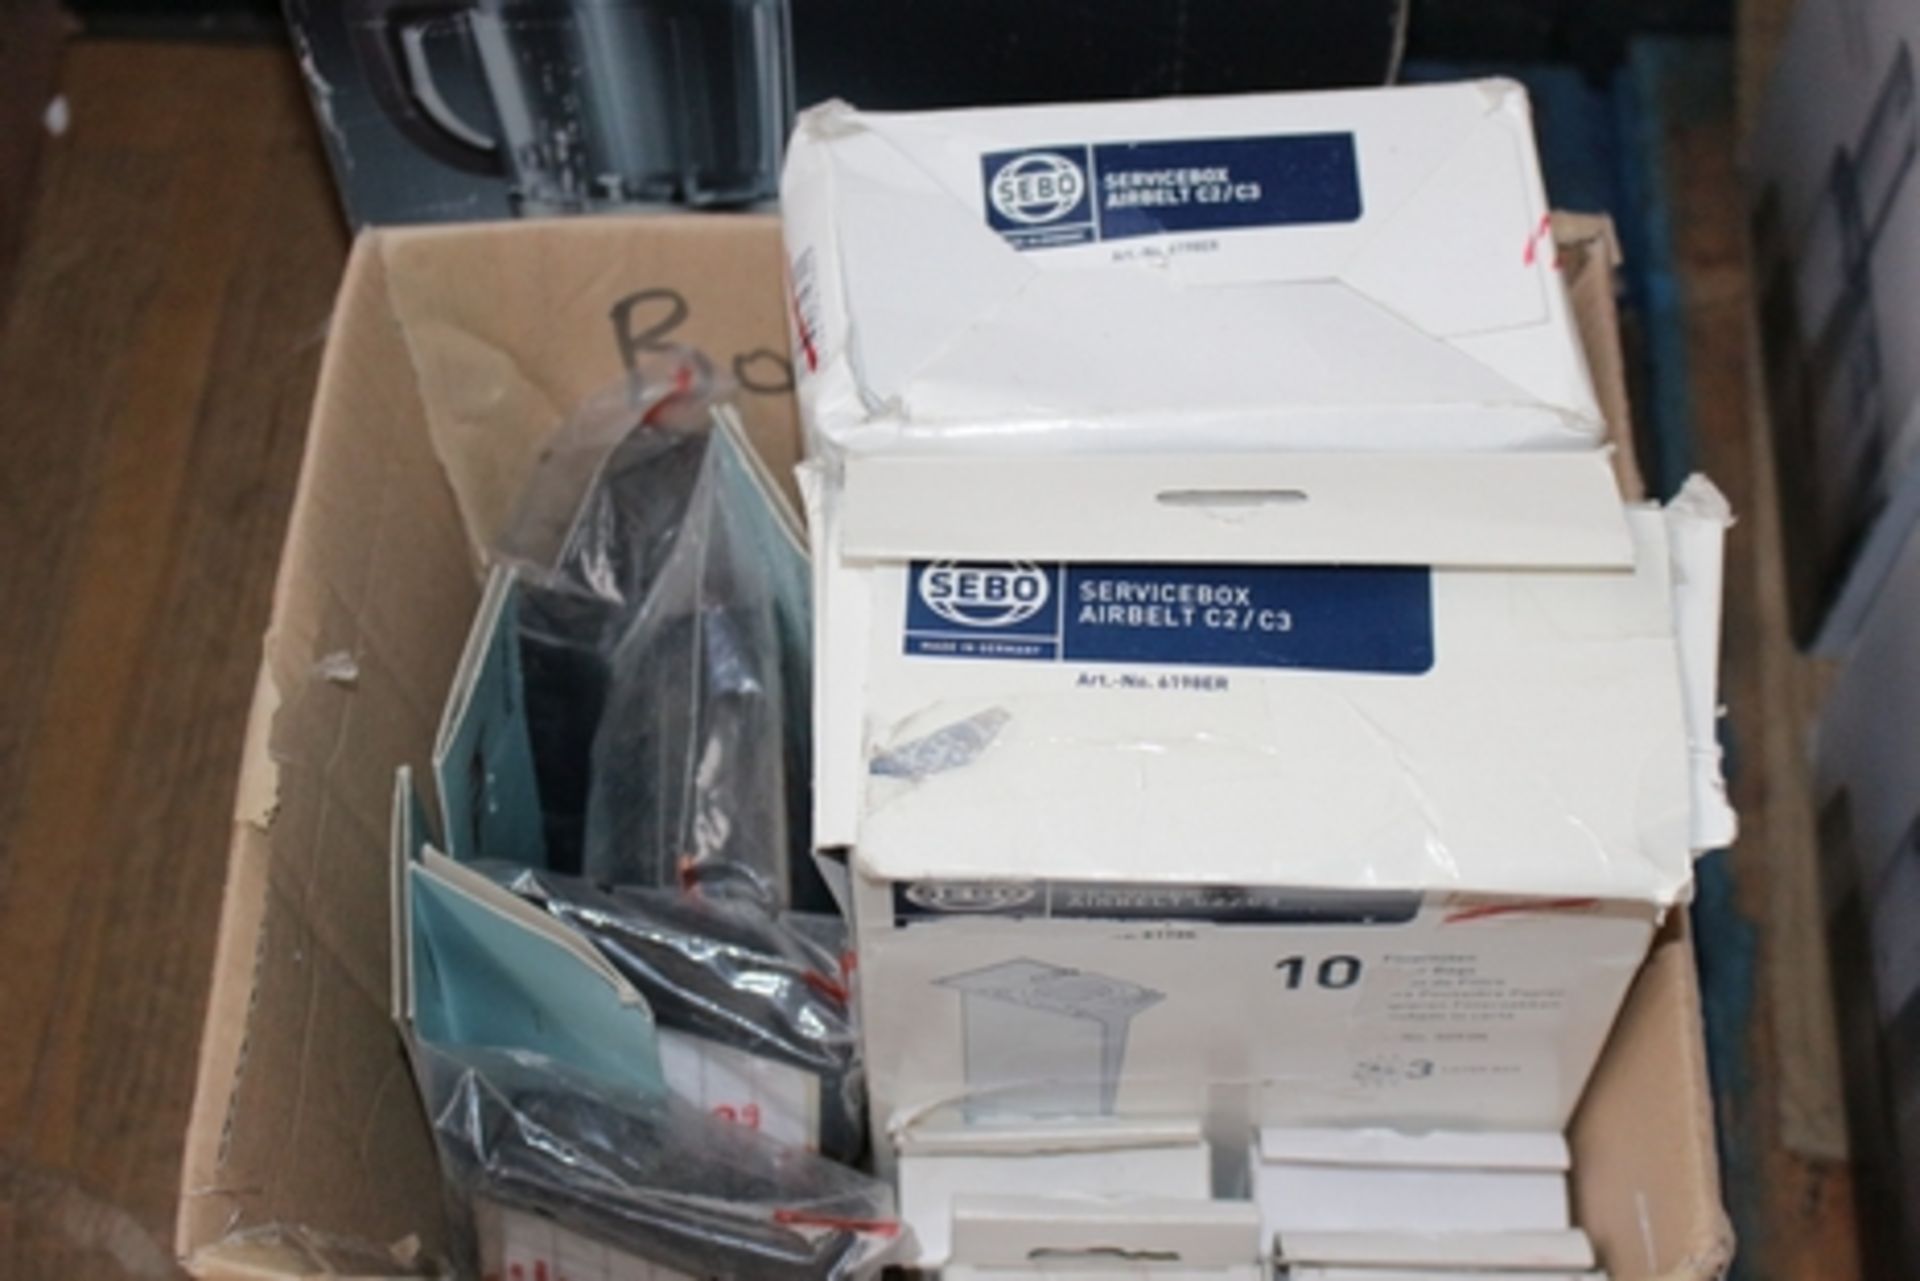 1X LOT TO CONTAIN 10 BOXED AND UNBOXED ITEMS TO INCLUDE HEPA FILTERS AND SEBO SERVICE BOX AIR